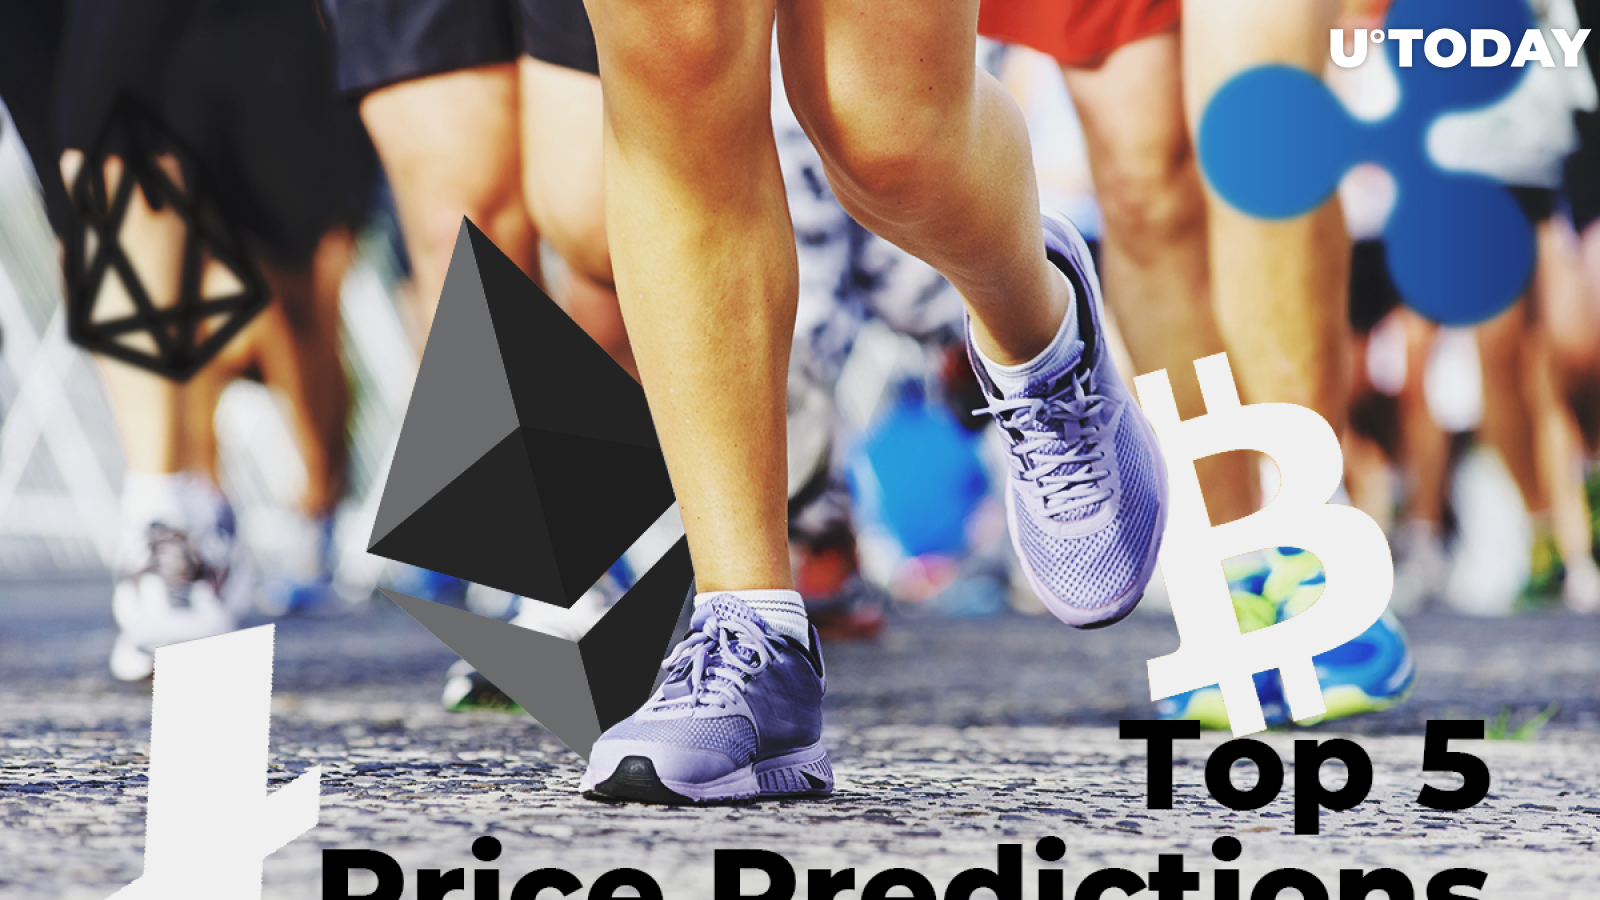 Top 5 Price Predictions BTC, ETH, XRP, LTC, EOS — Expect Breakouts and Fails